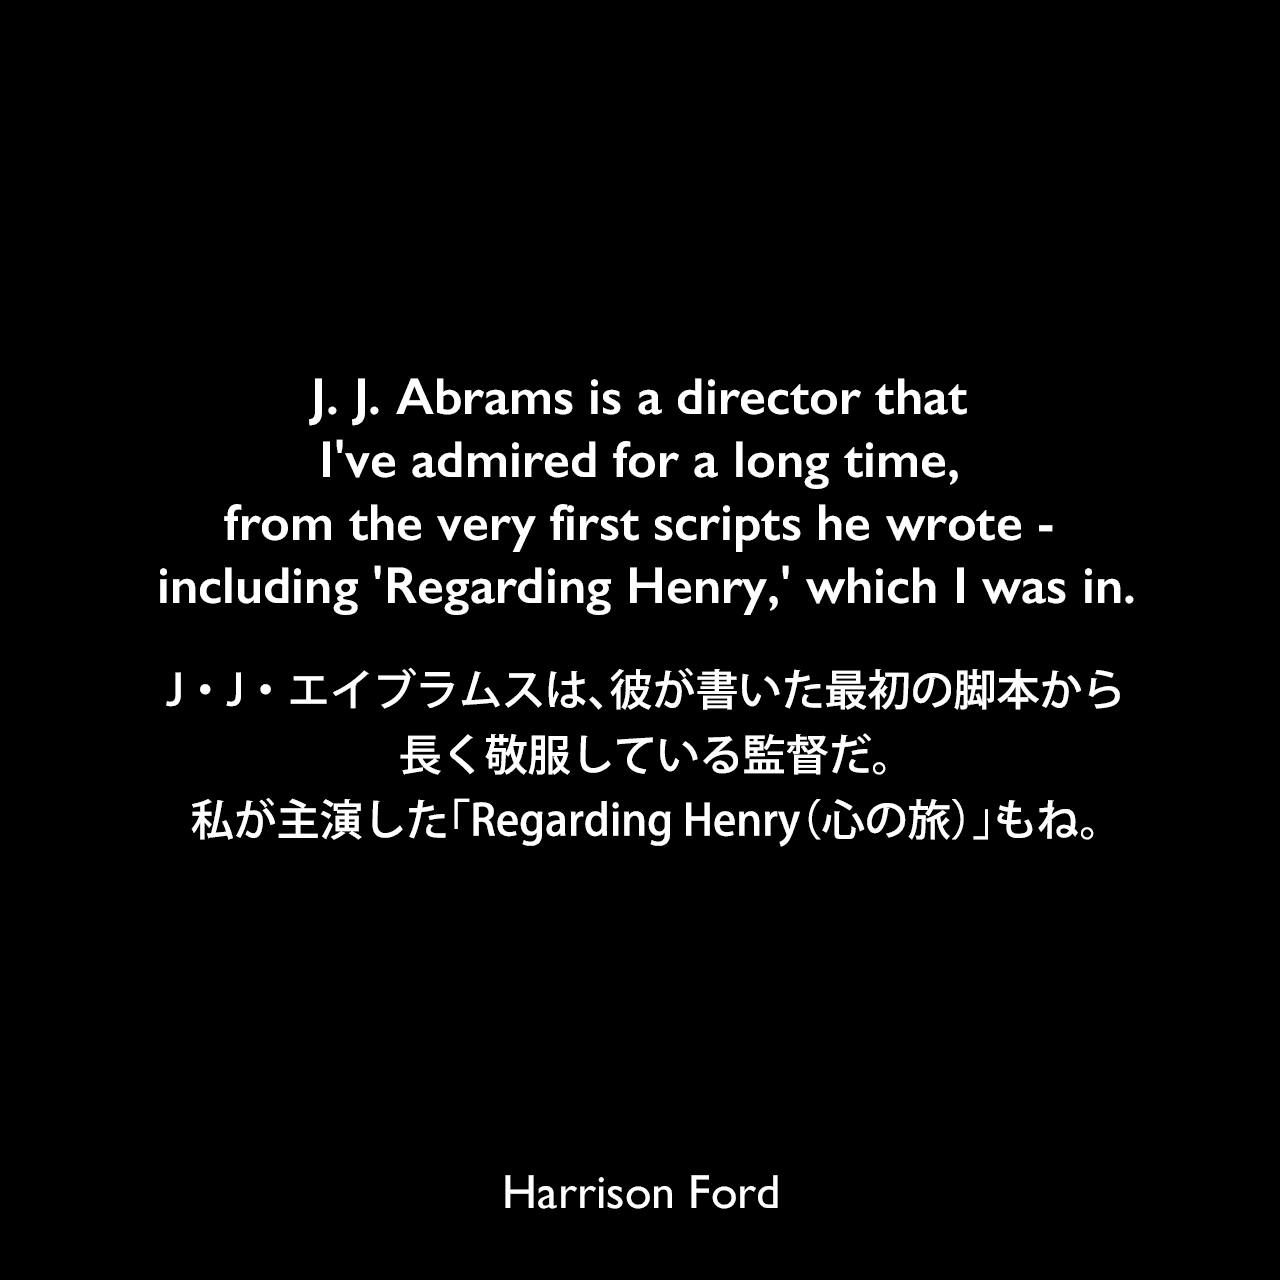 J. J. Abrams is a director that I've admired for a long time, from the very first scripts he wrote - including 'Regarding Henry,' which I was in.J・J・エイブラムスは、彼が書いた最初の脚本から長く敬服している監督だ。私が主演した「Regarding Henry（心の旅）」もね。Harrison Ford